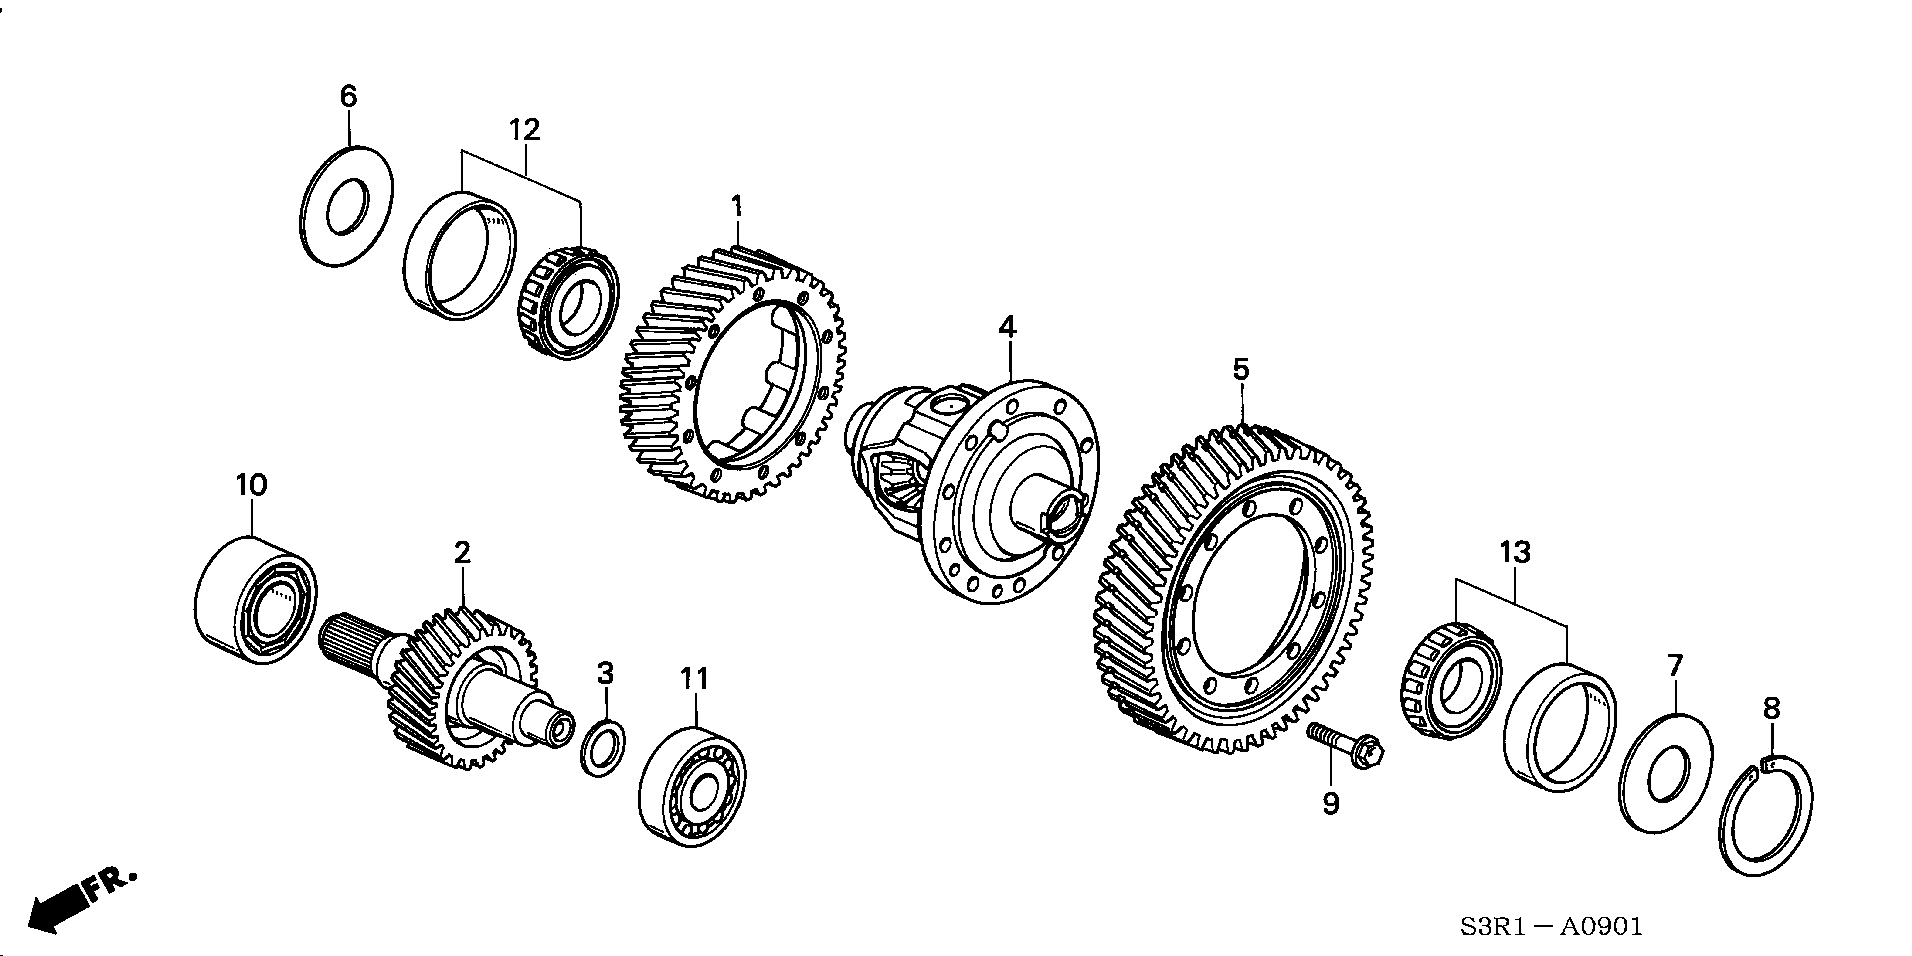 DIFFERENTIAL(V6) (4WD)